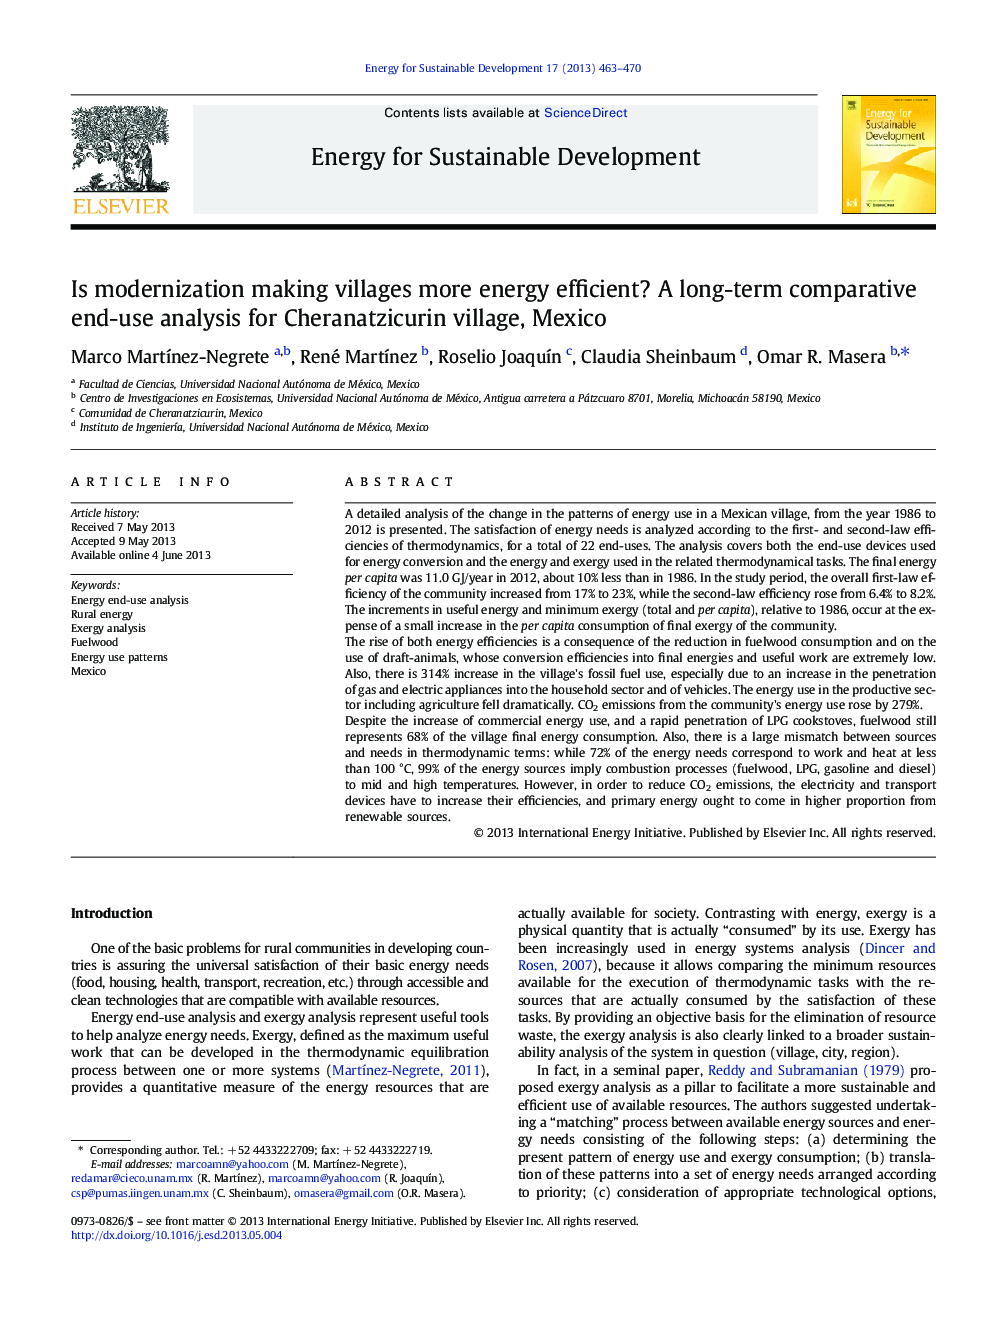 Is modernization making villages more energy efficient? A long-term comparative end-use analysis for Cheranatzicurin village, Mexico